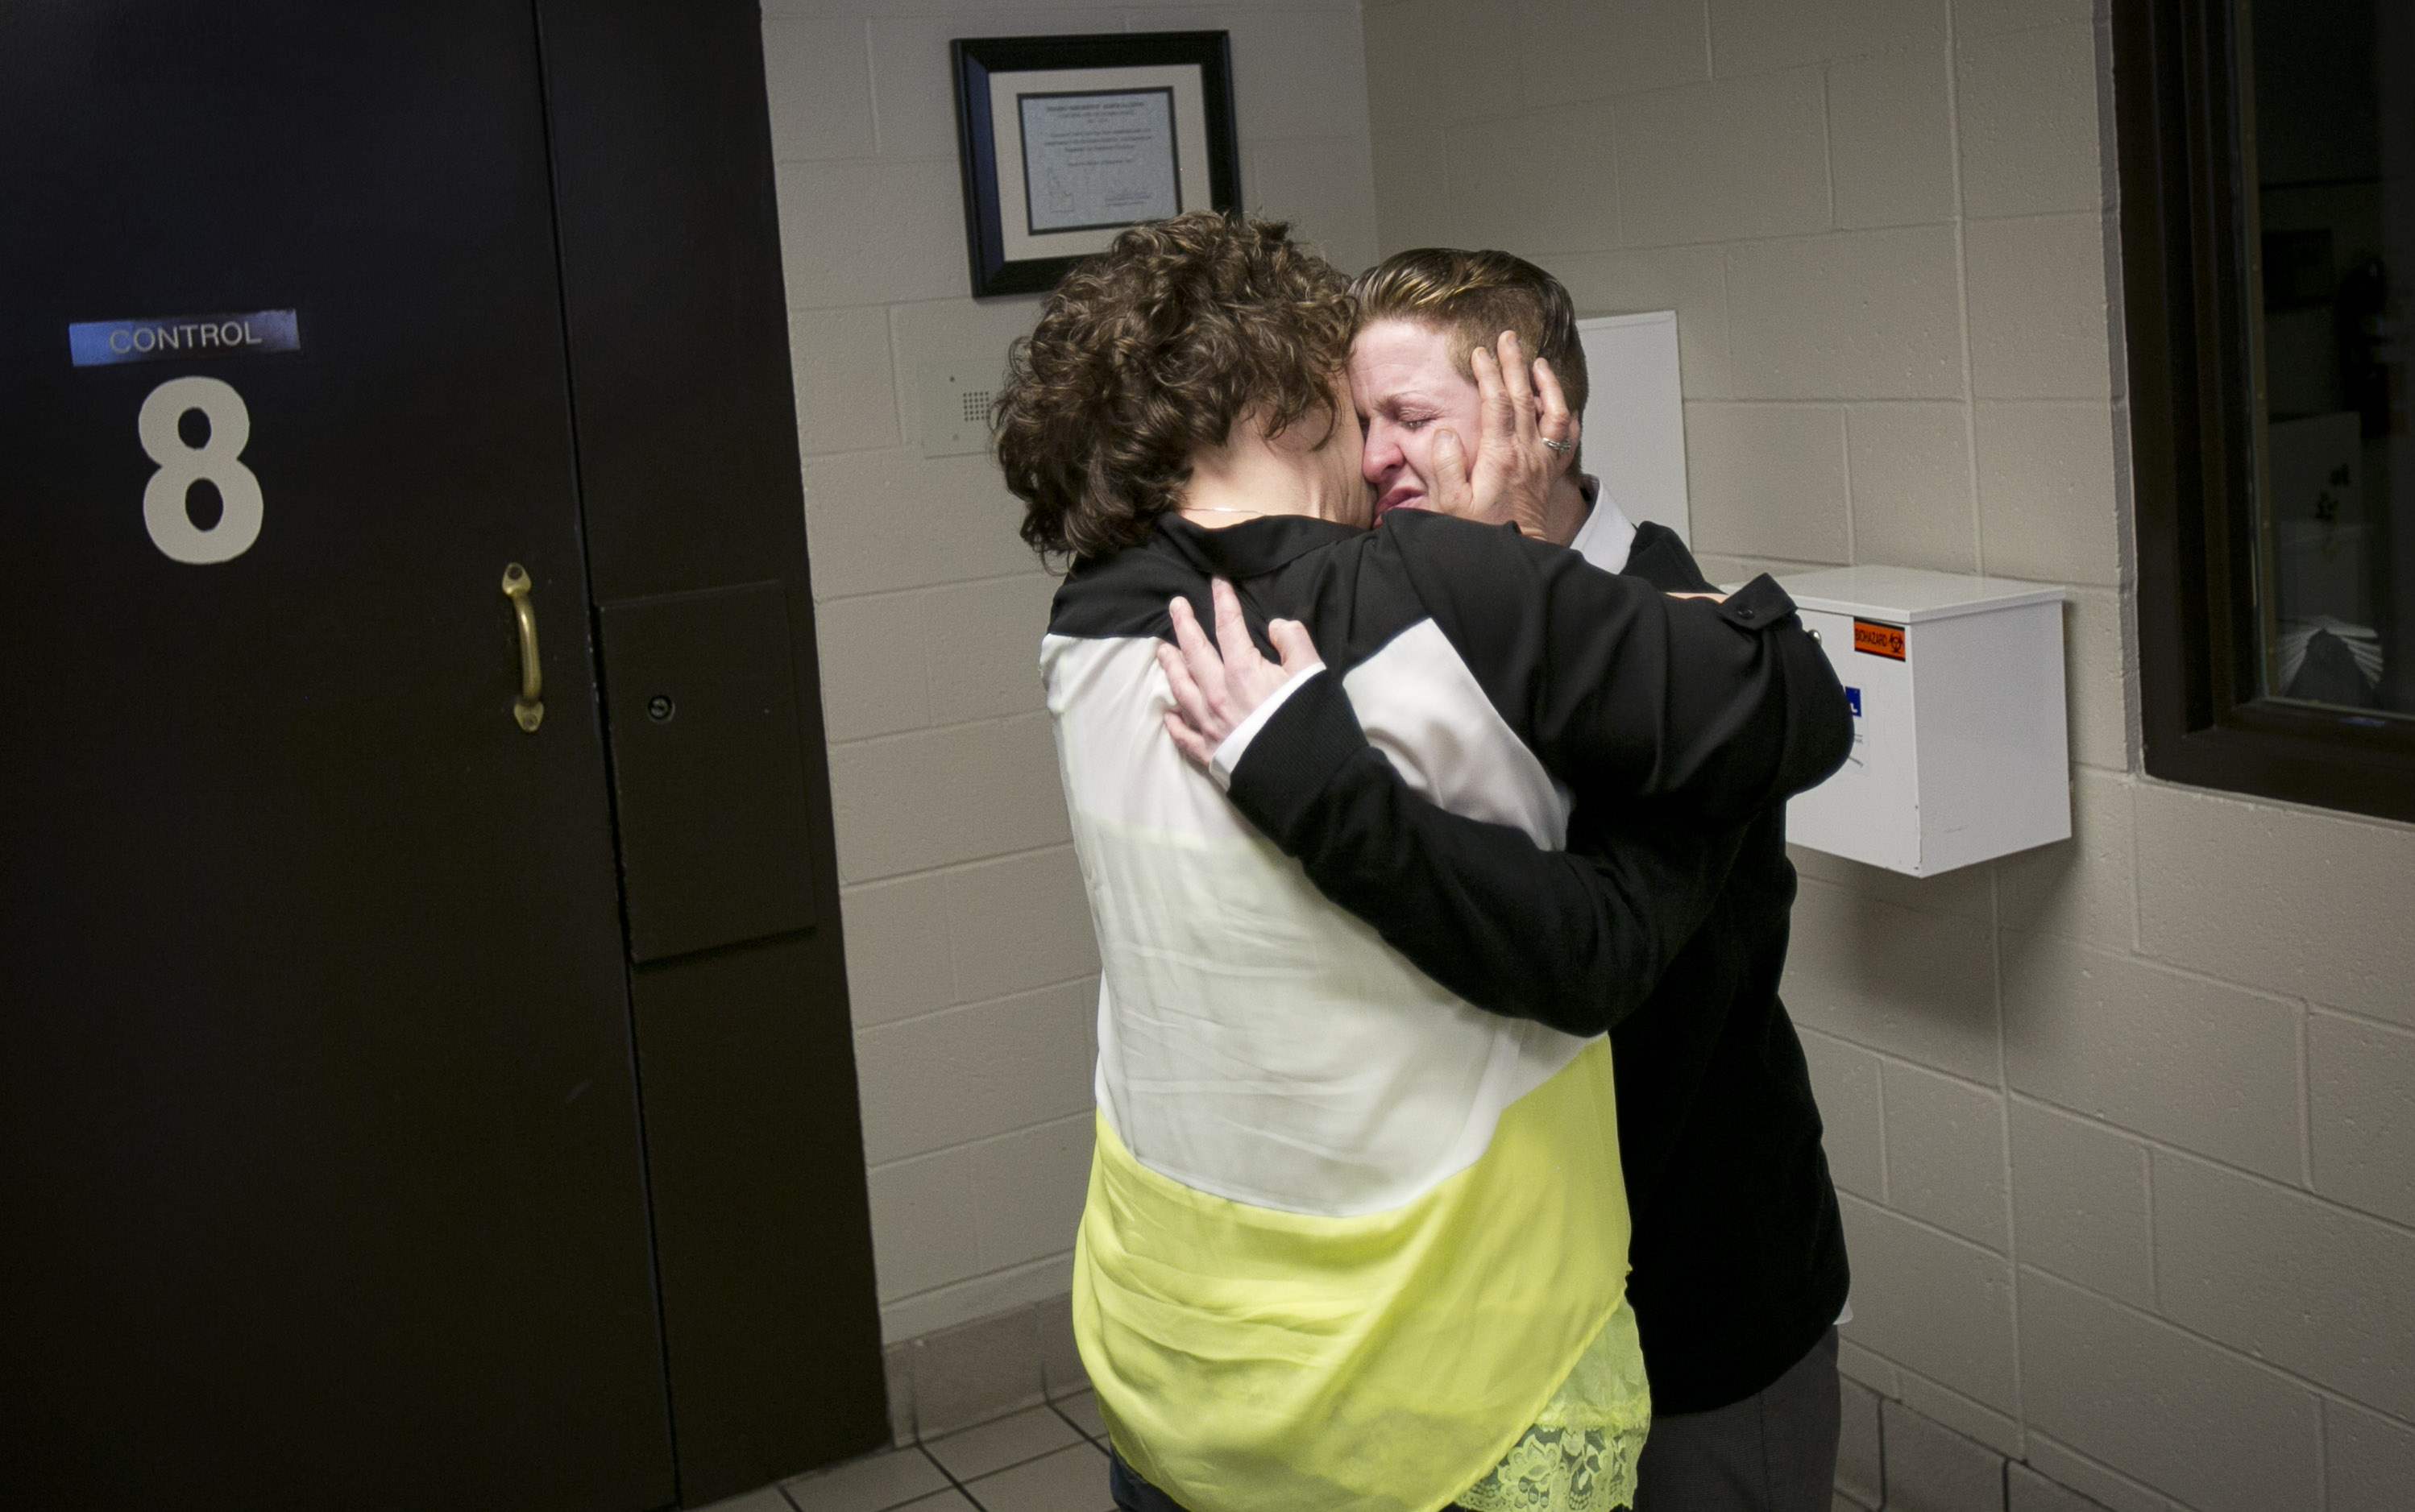 Idaho woman serving life sentence freed after deal | The Spokesman-Review